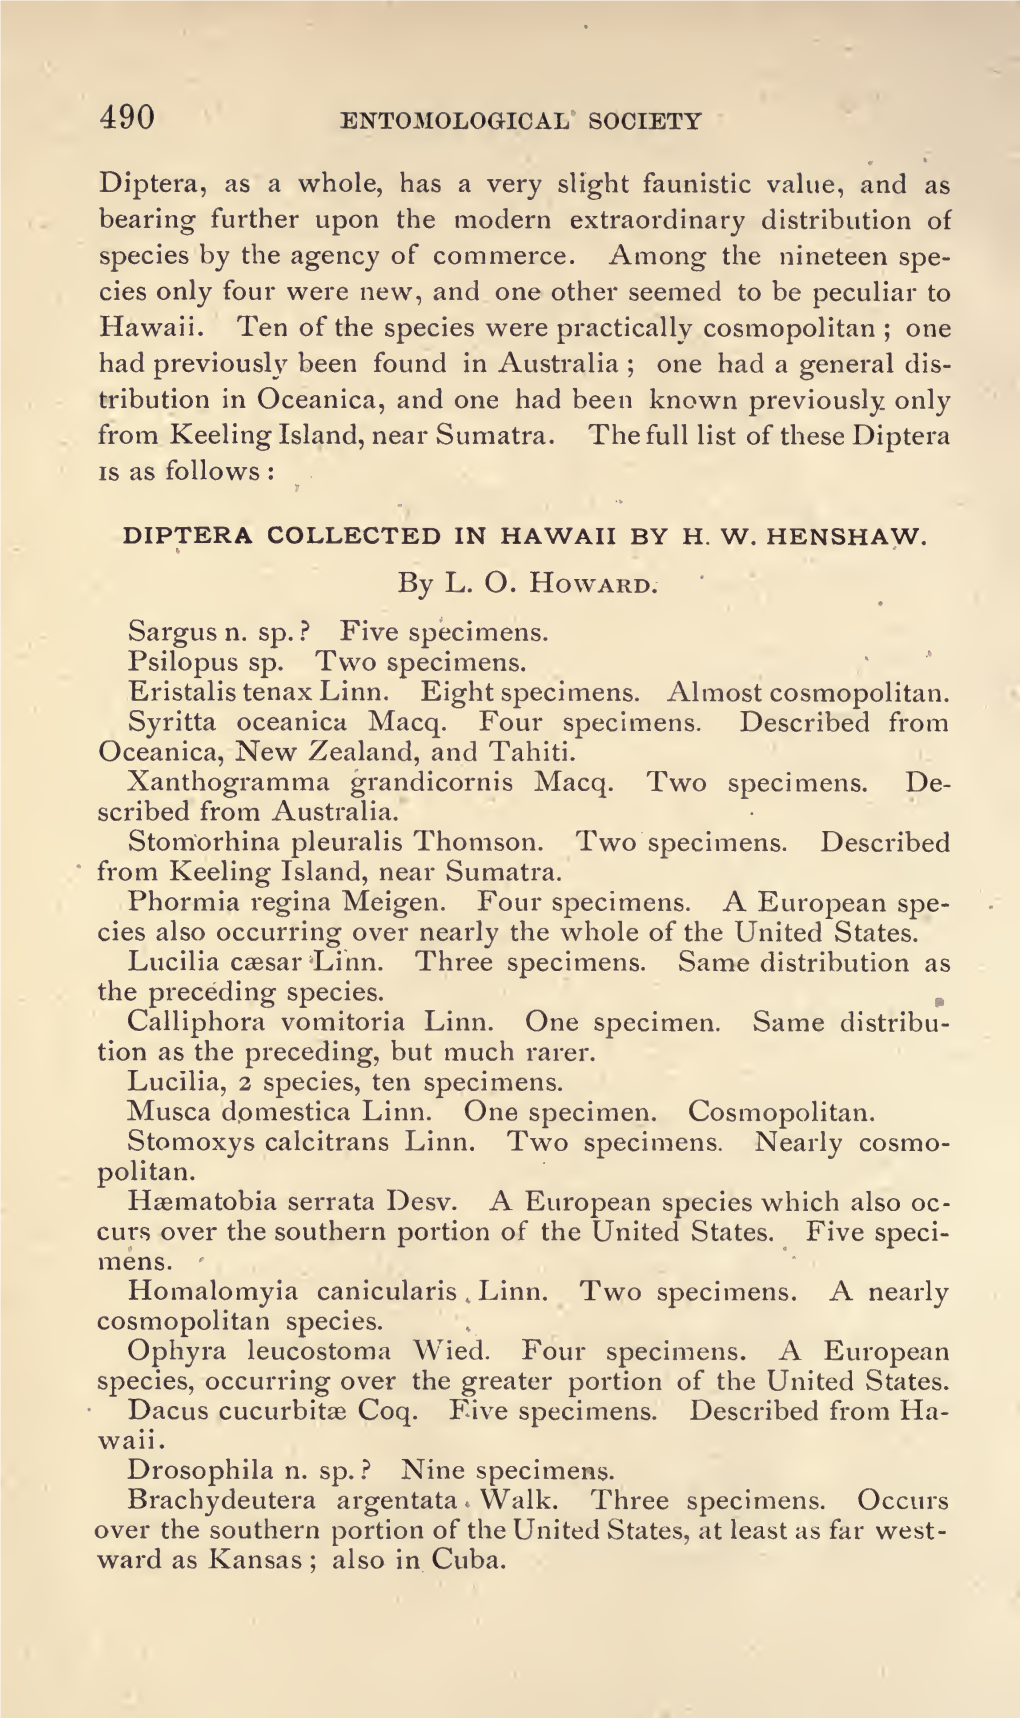 DIPTERA COLLECTED in HAWAII by H. W. HENSHAW. by L